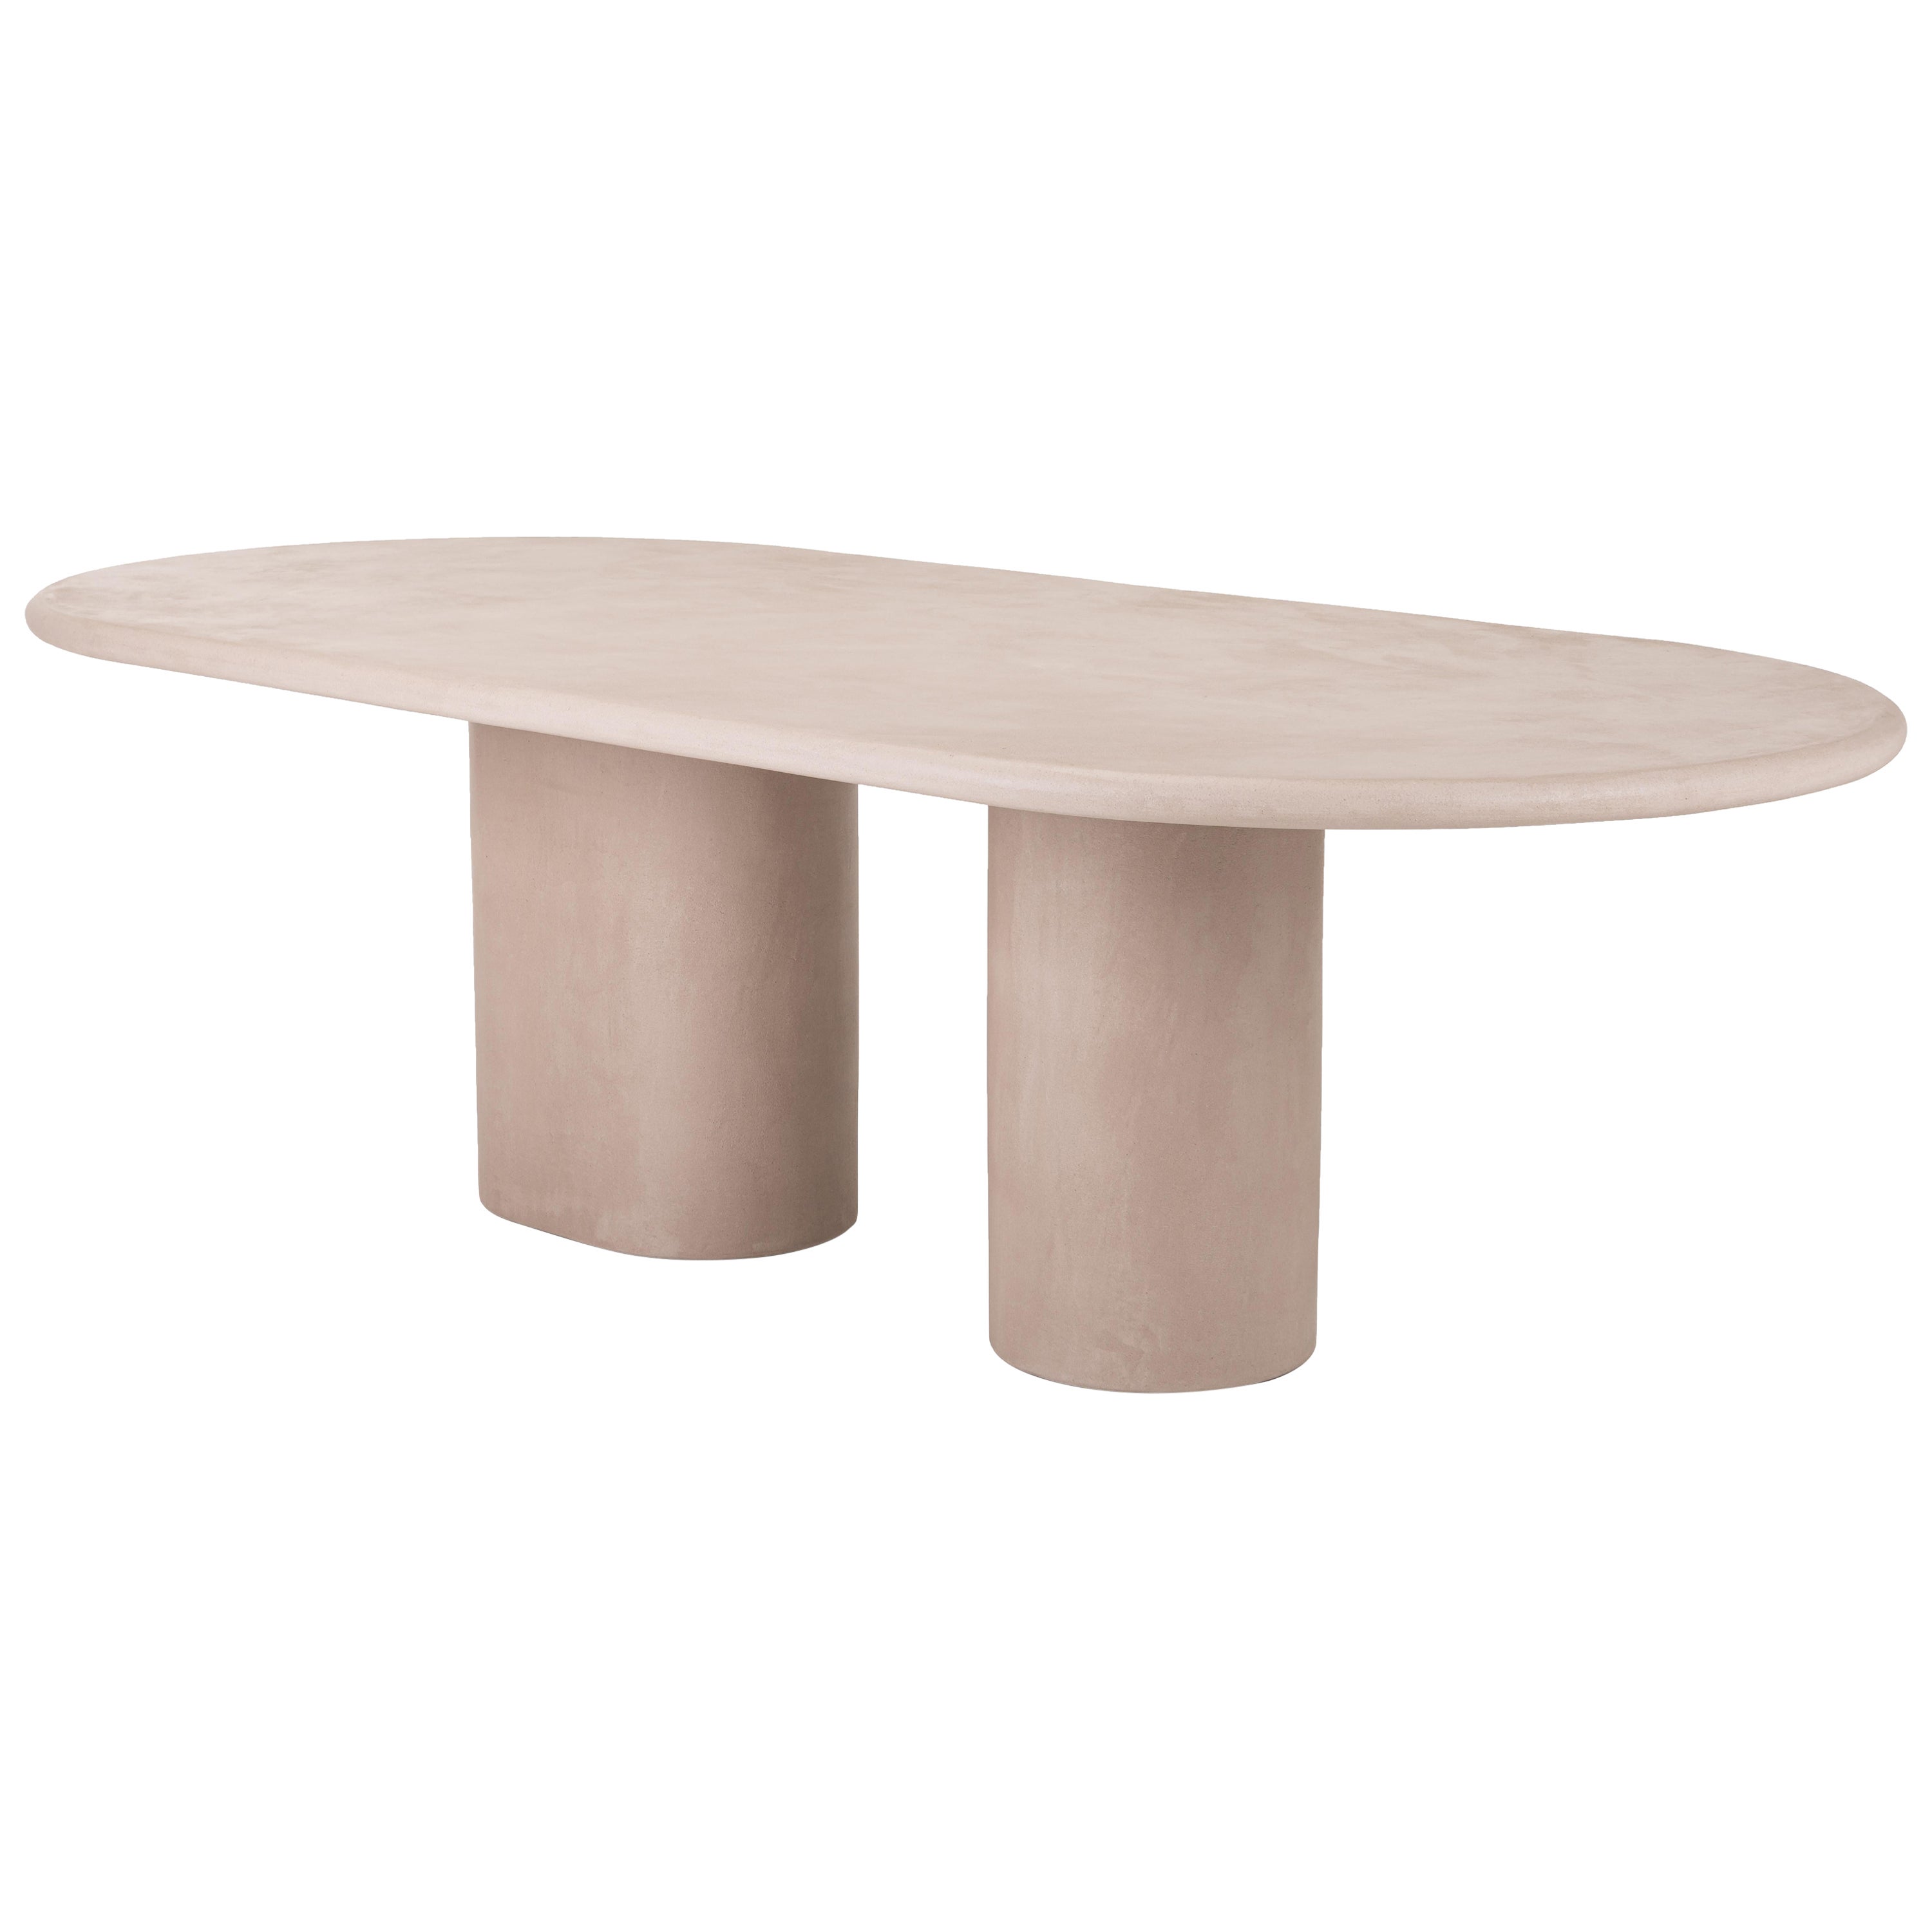 Contemporary Rounded Natural Plaster "Column" Table 300 cm by Isabelle Beaumont For Sale